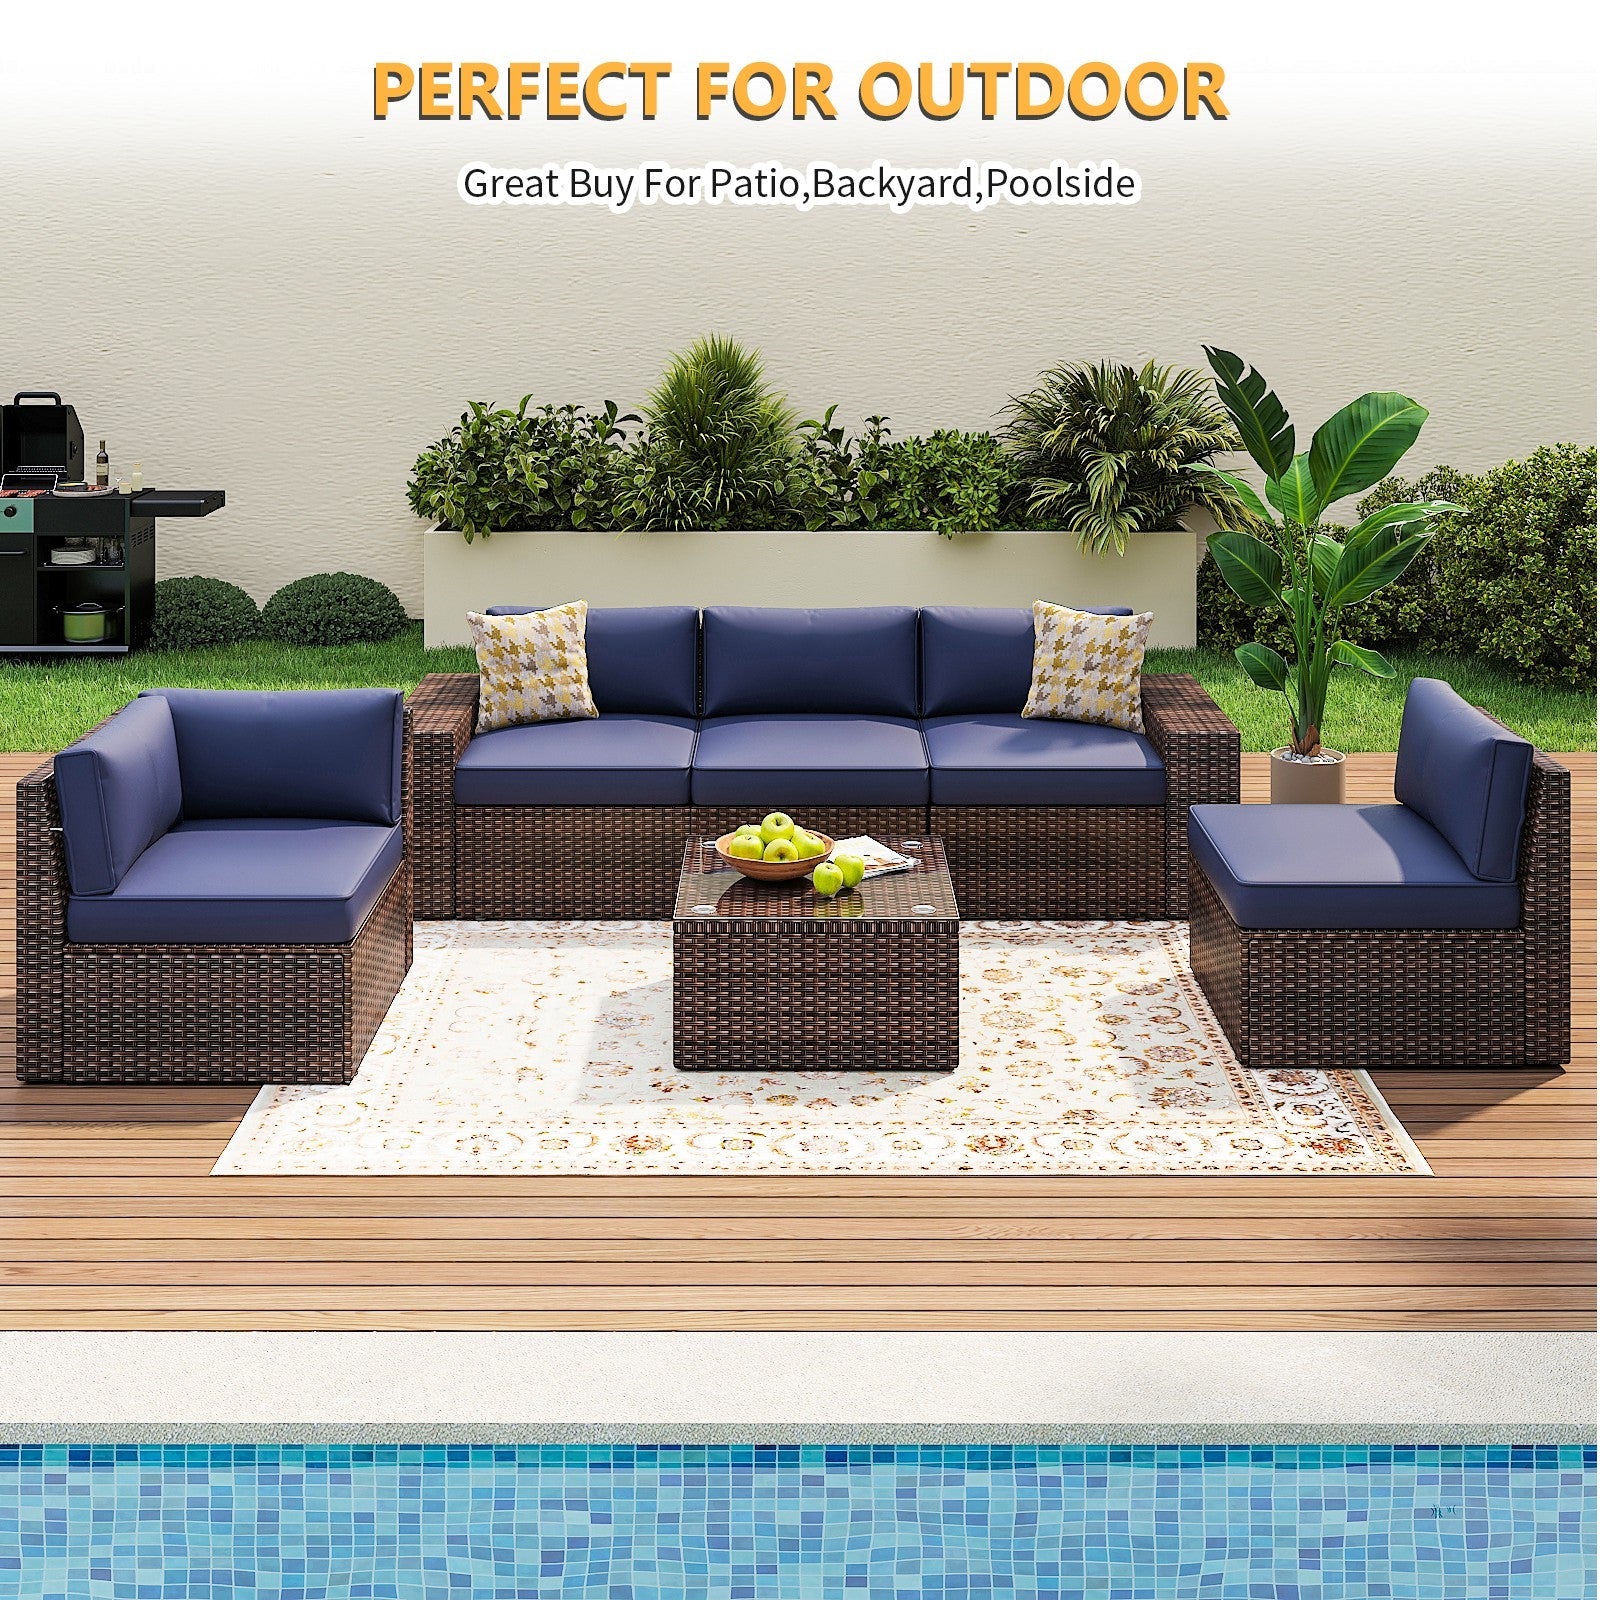 6 Pieces Wicker Sectional Sofa Set Outdoor Furniture Rattan Patio Conversation Set with Removable Cushions and Tempered Glass Coffee Table (Blue/Red/Beige)